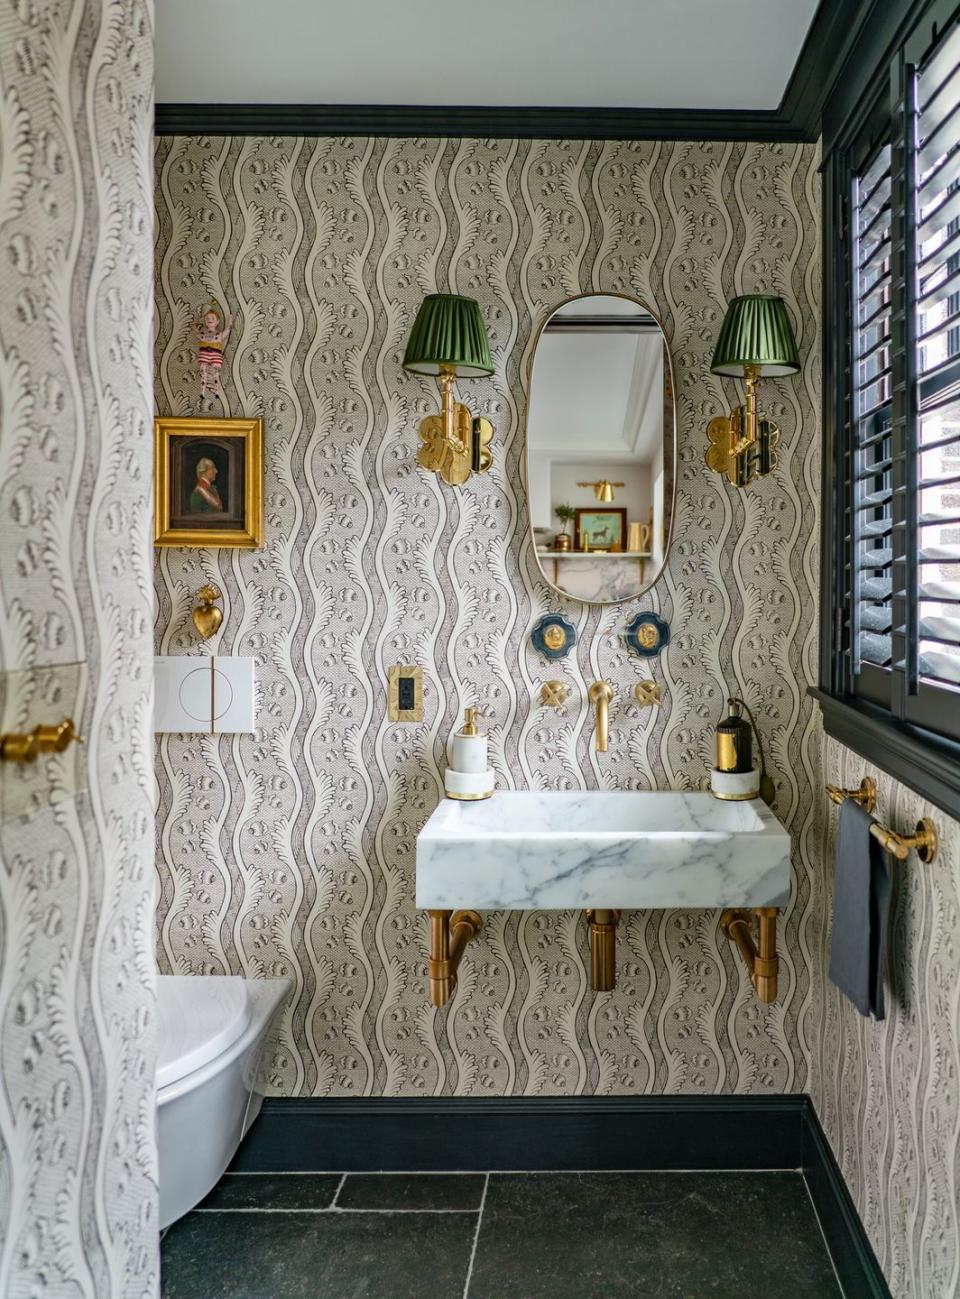 a wavy antoinette poisson print adds whimsy to this tailored powder room by liz caan no shower means no need to worry about humidity affecting the glue